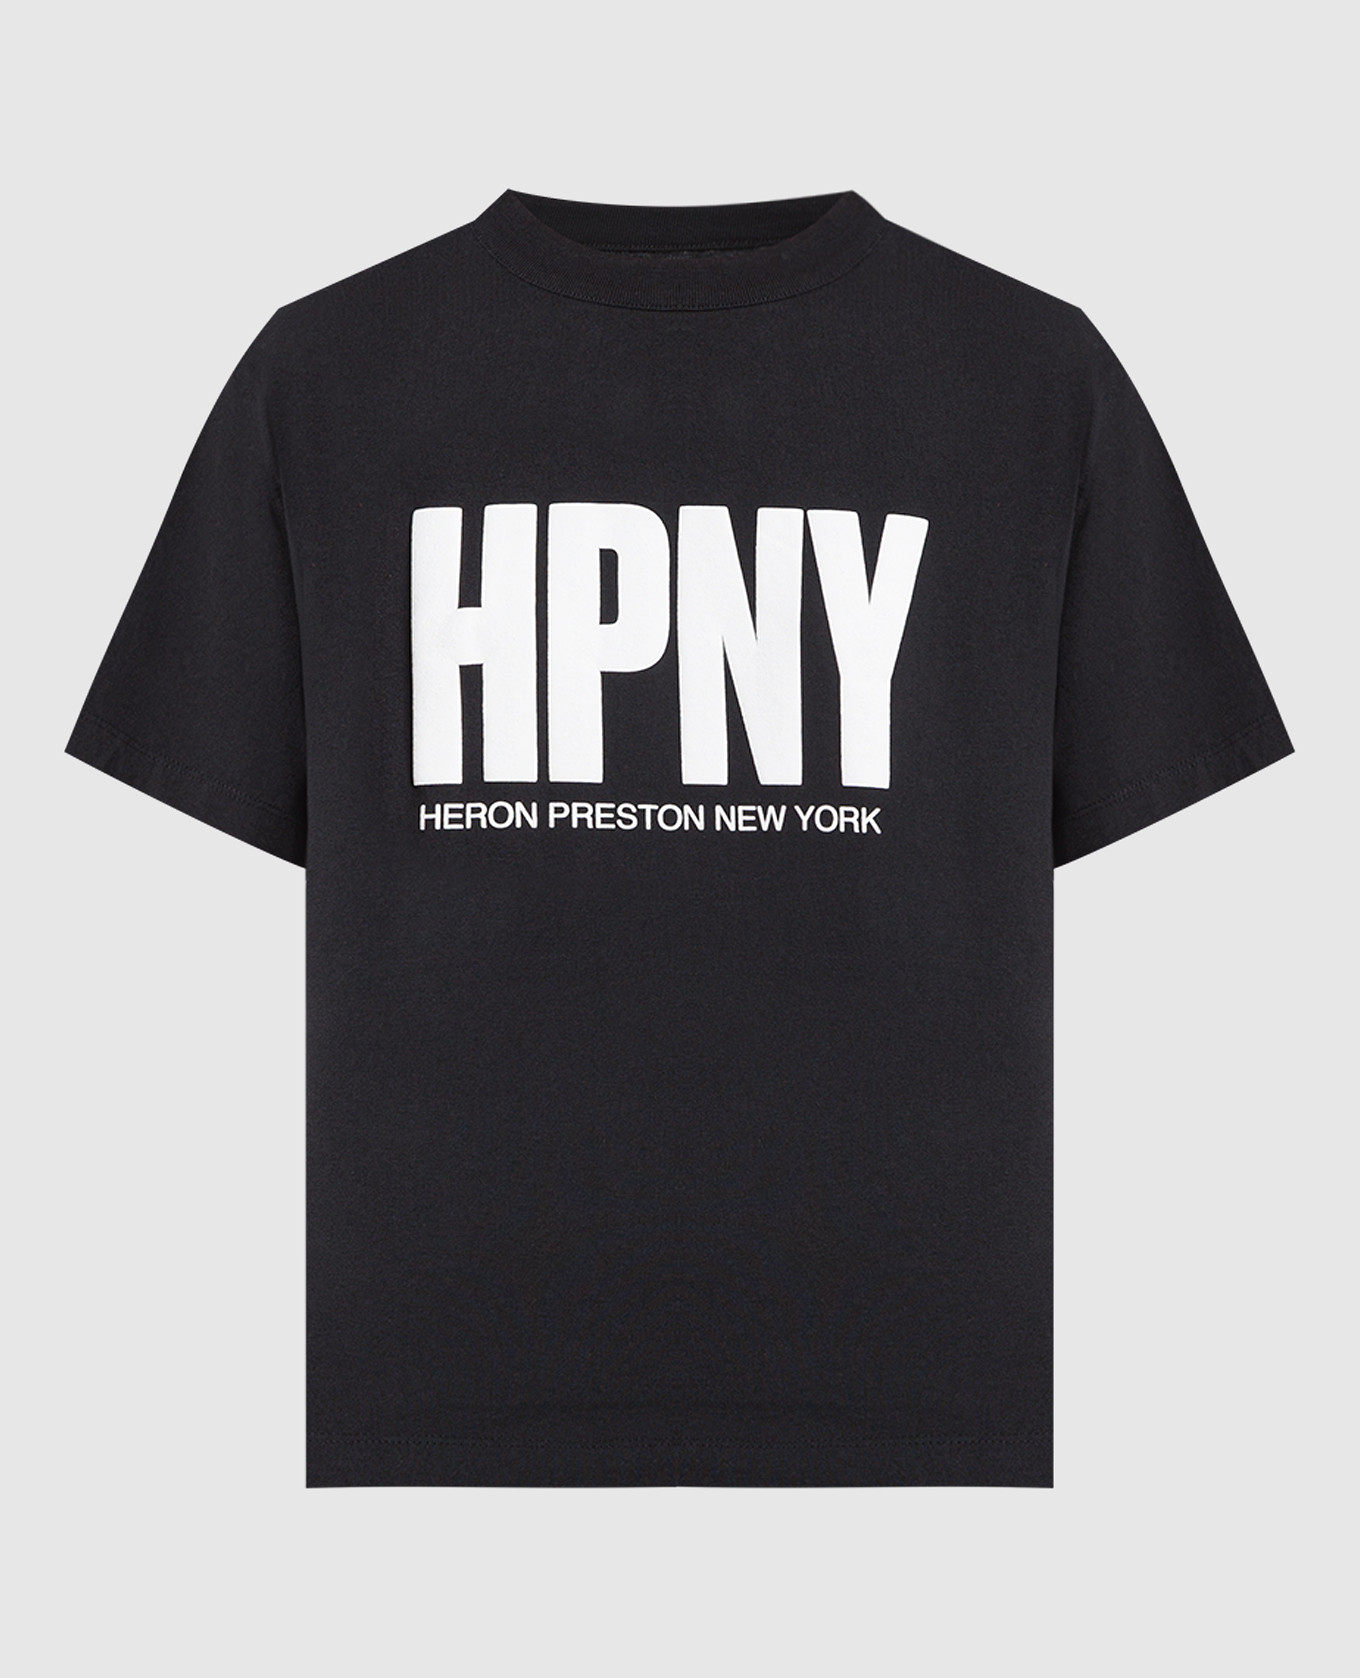 Black t-shirt with contrasting HPNY logo